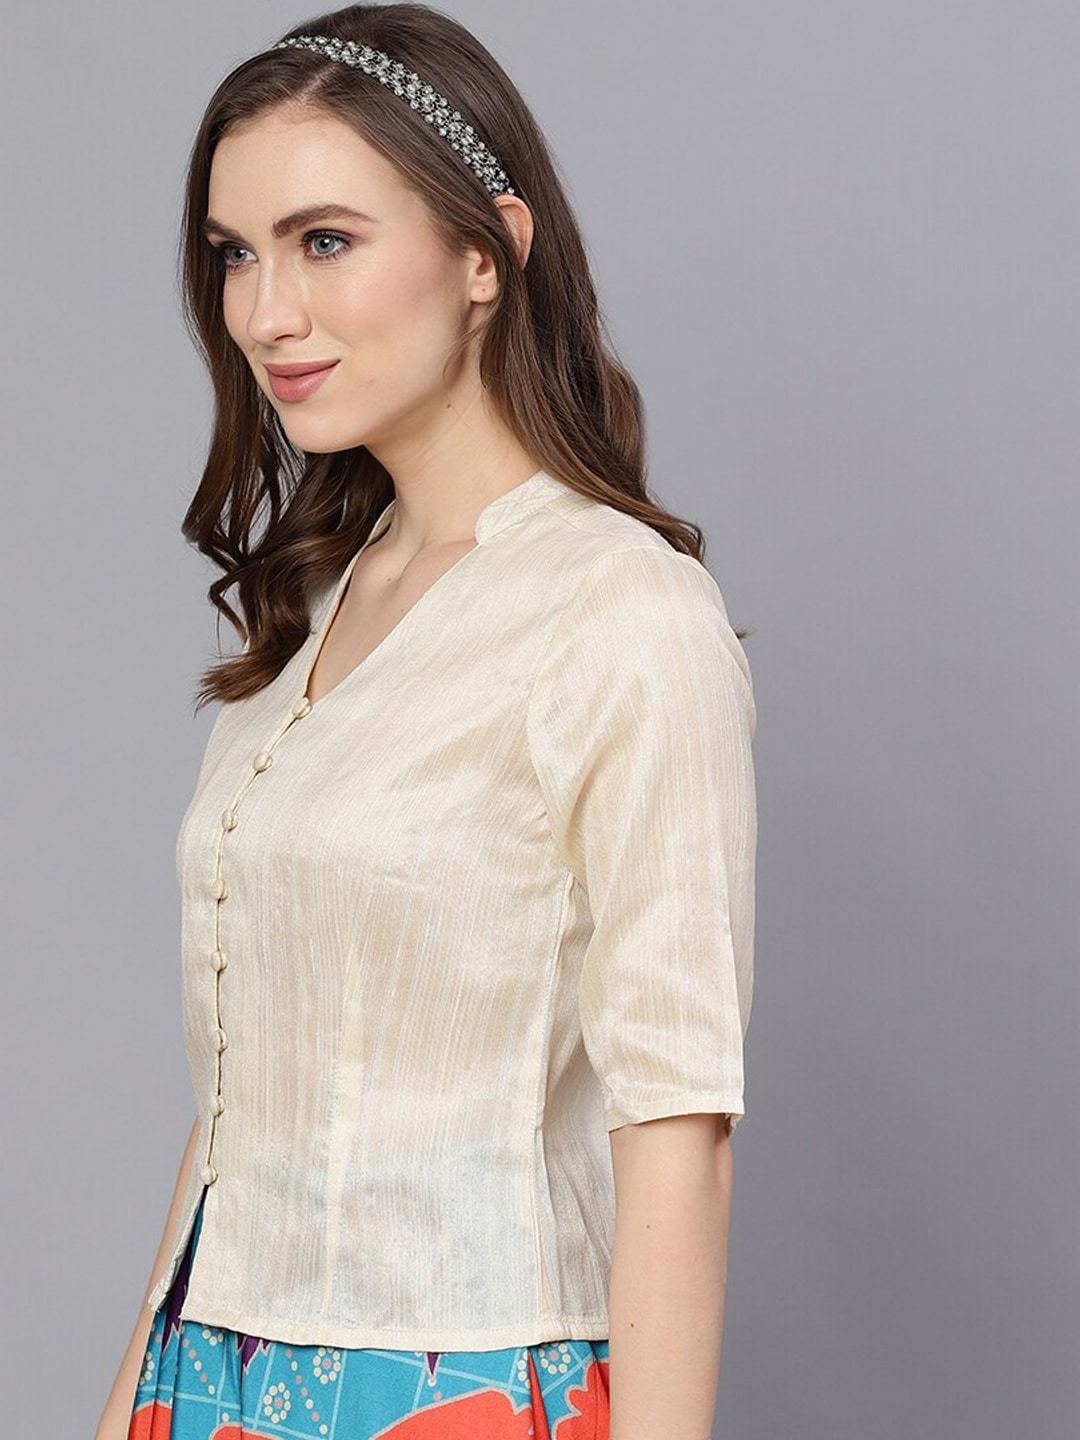 Women's Cream-Coloured Solid Shirt Style Top - AKS